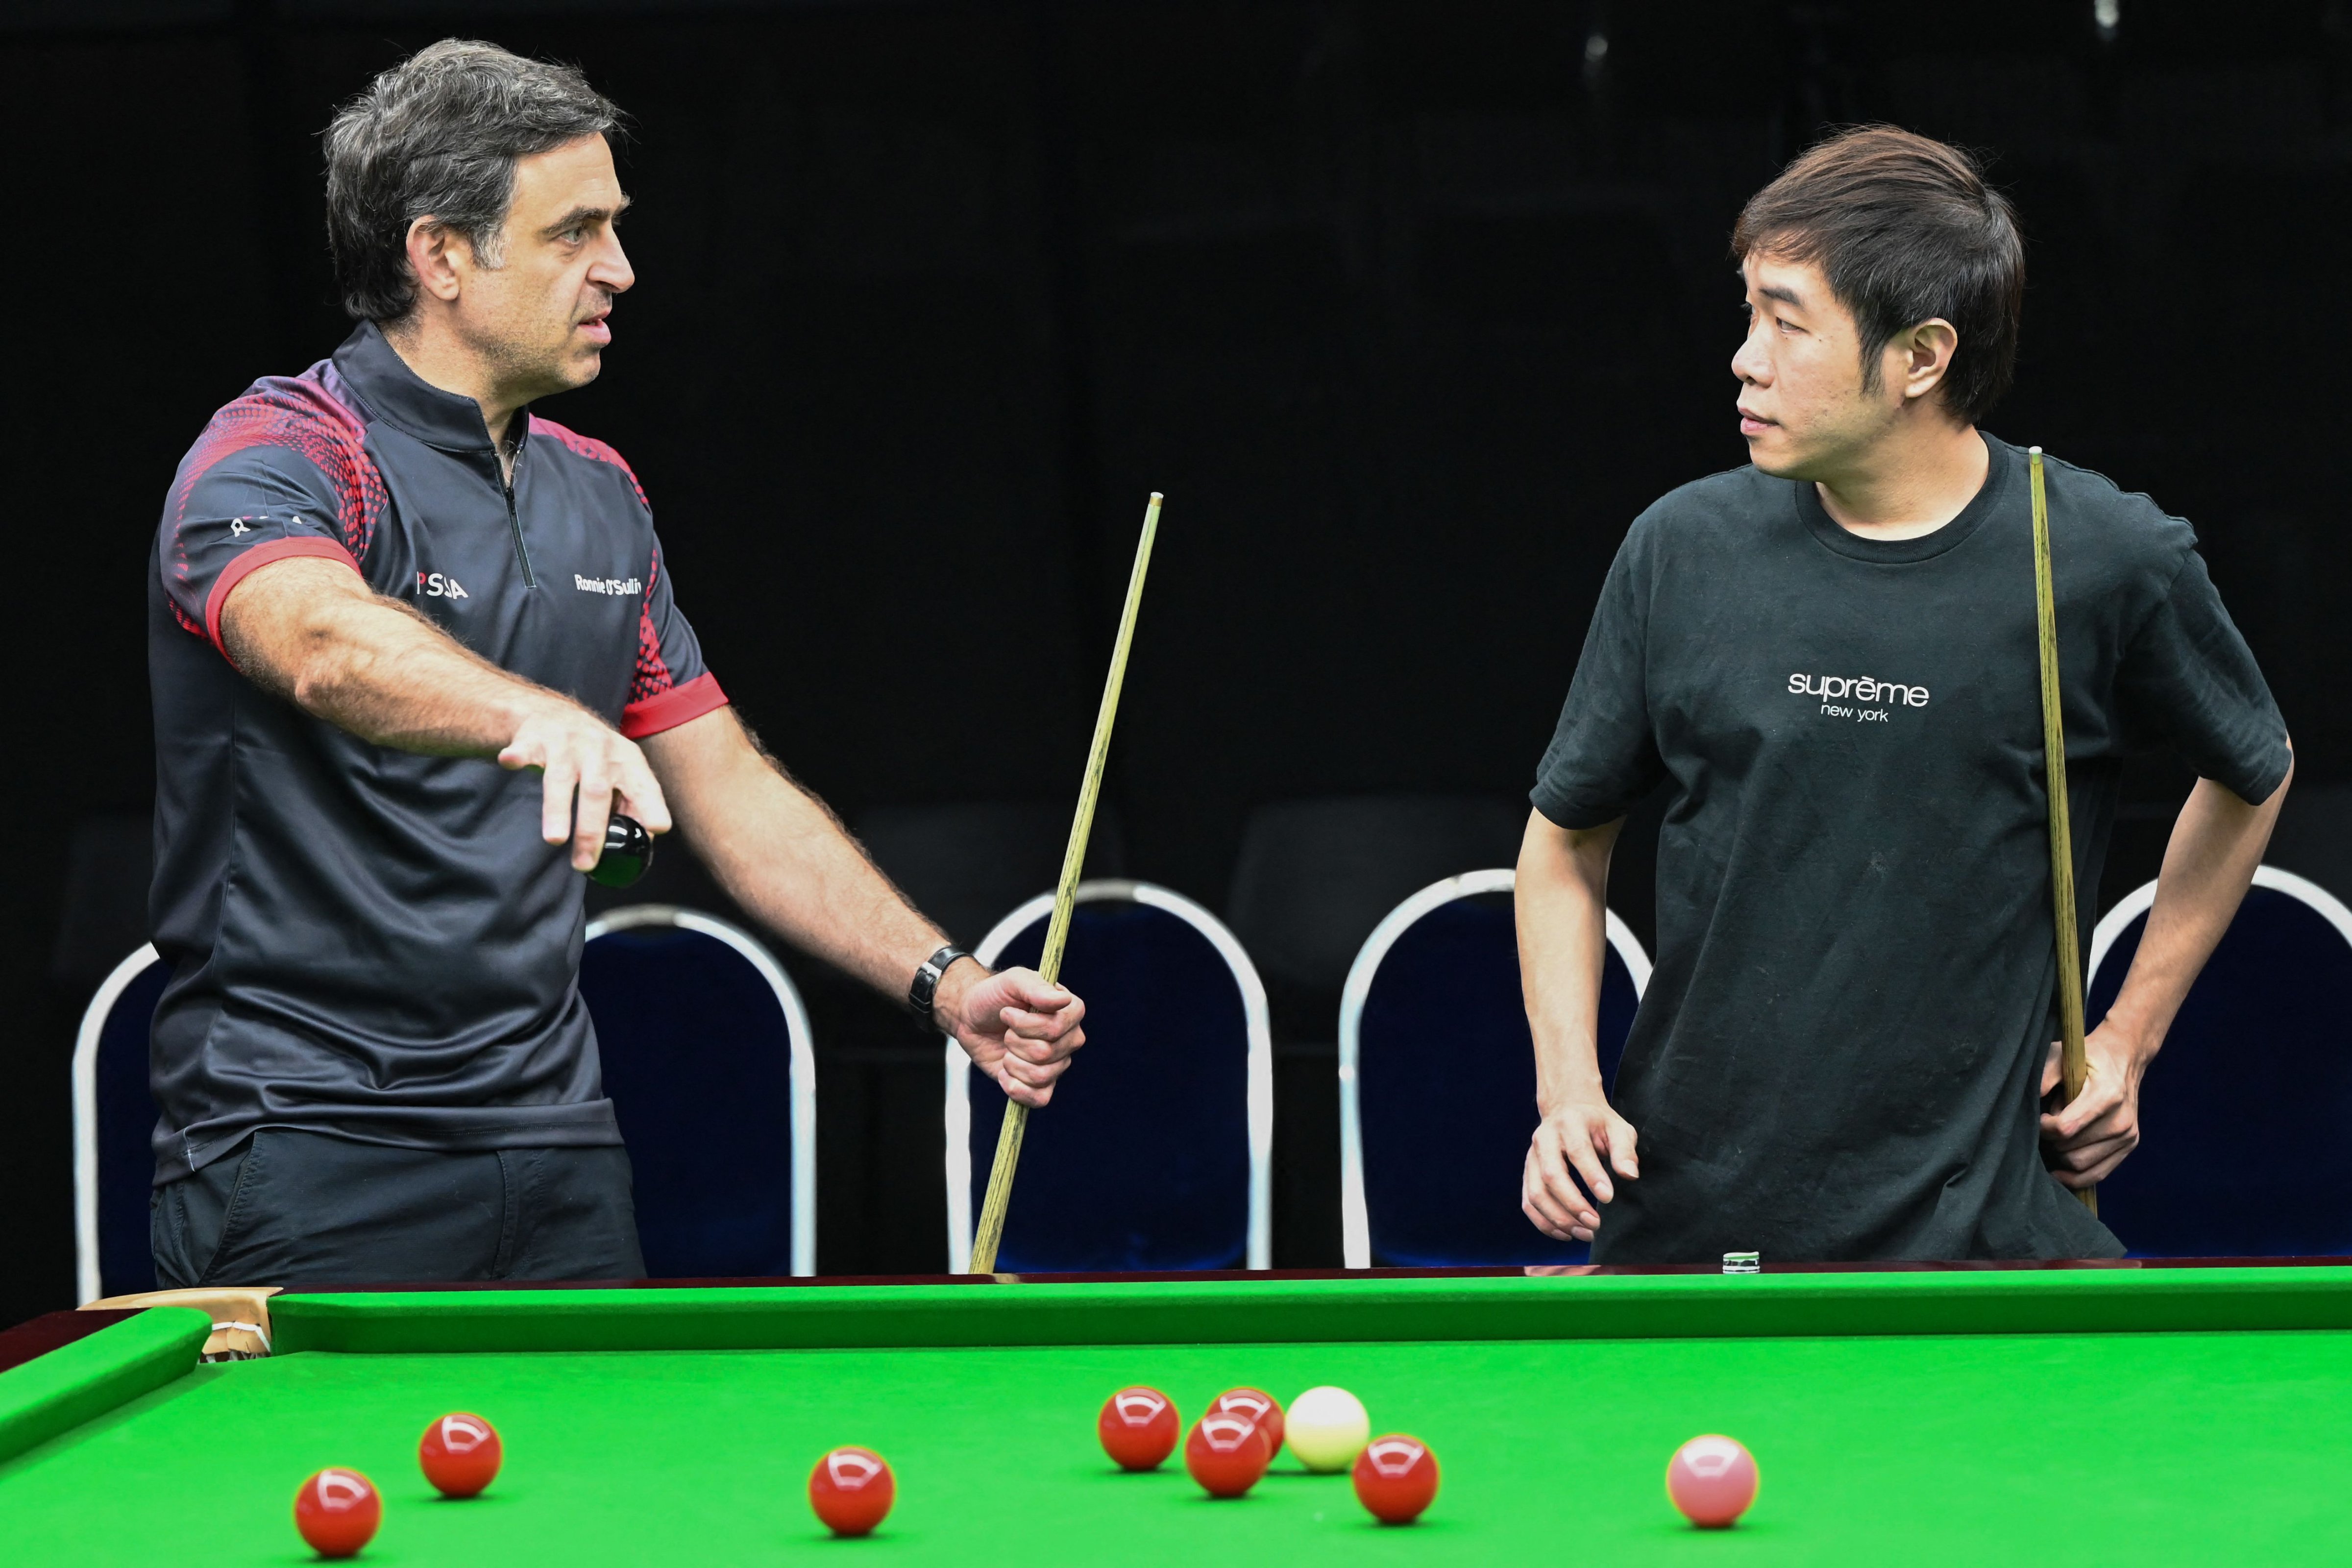 World No. 1 Ronnie O'Sullivan gives a snooker lesson to Singapore national player Jaden Ong at the newly opened Ronnie O'Sullivan Academy in Singapore on June 13, 2022. (Roslan Rahman—AFP/Getty Images)MOREHIDE